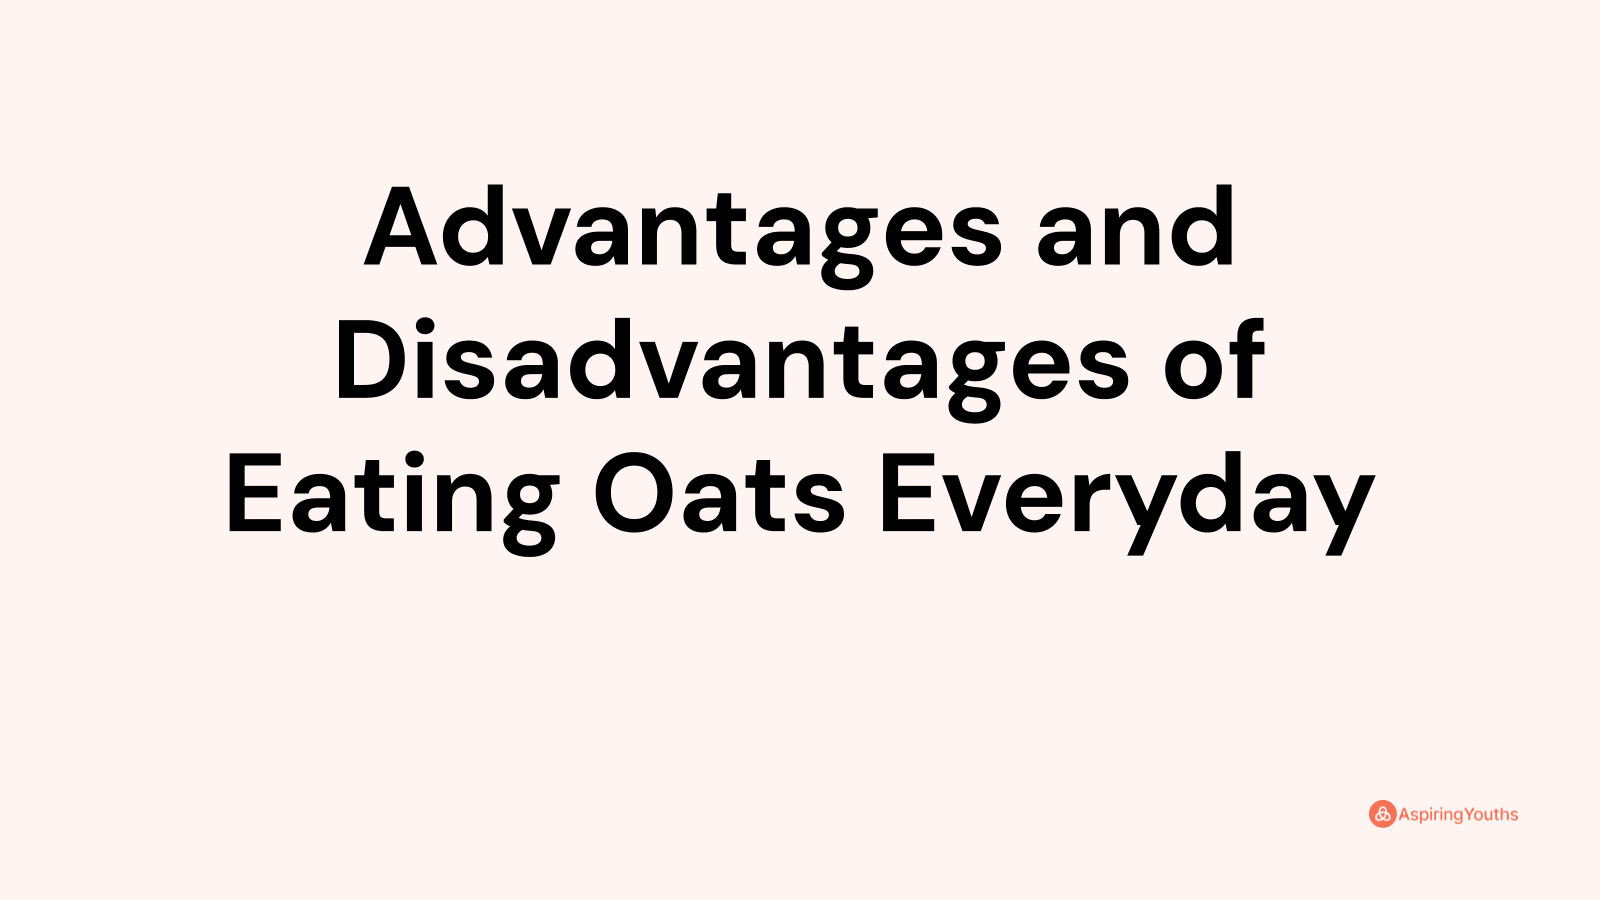 Advantages and disadvantages of Eating Oats Everyday